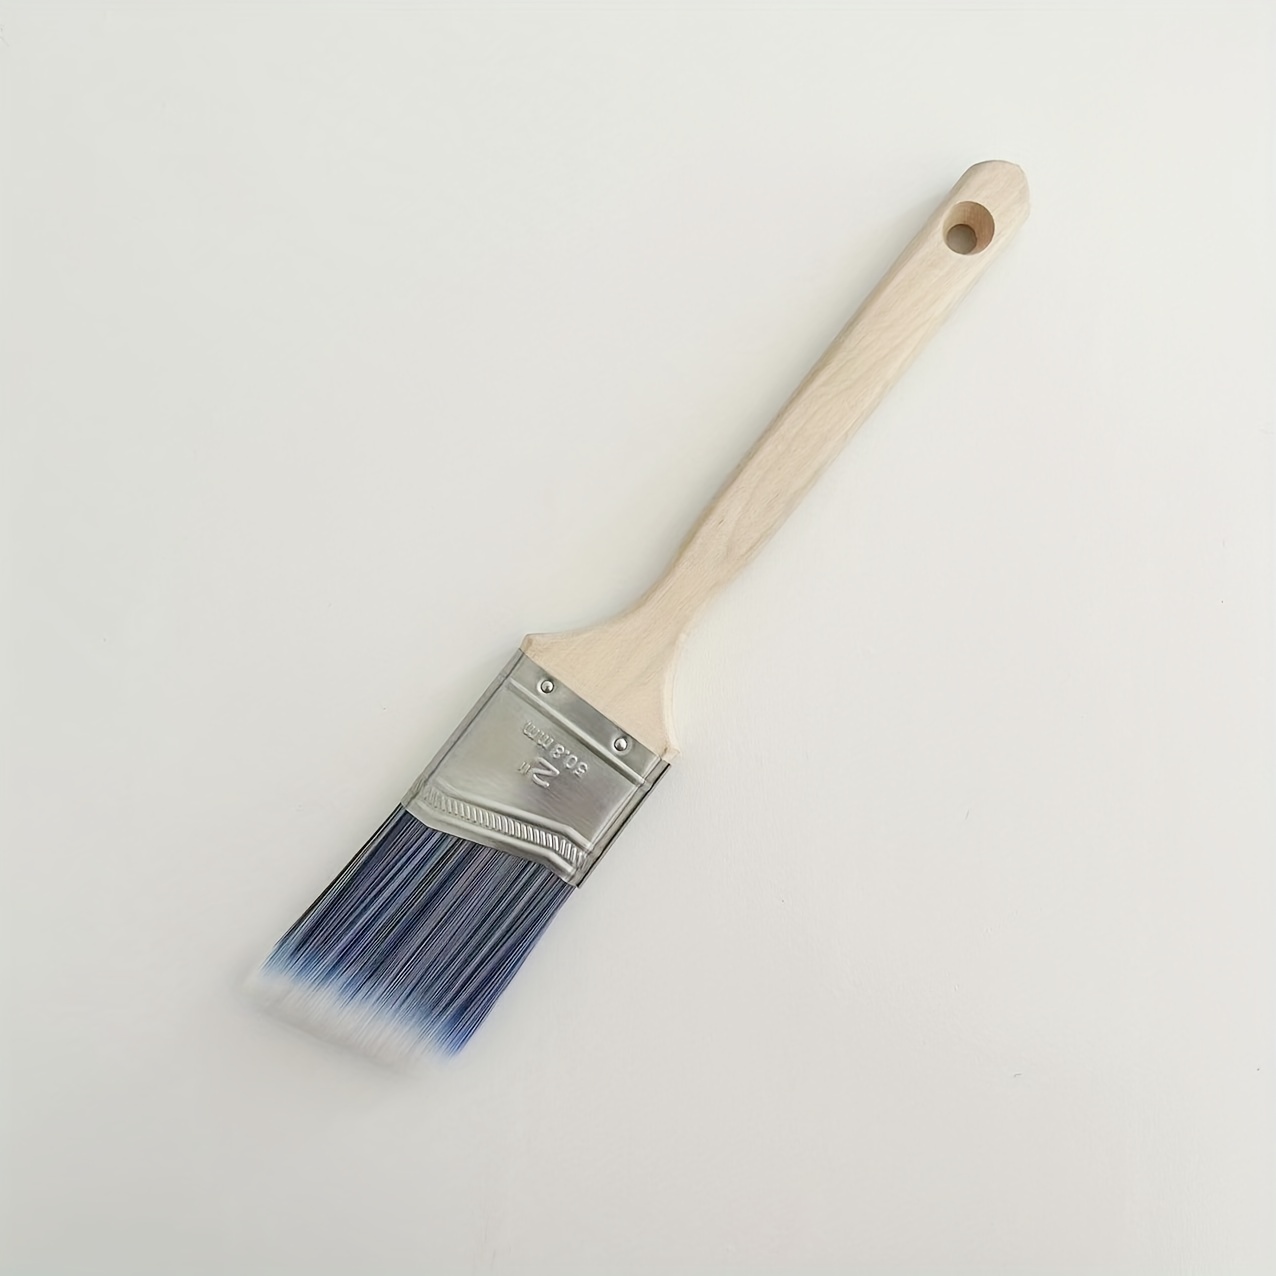 Trim Paint Brush Edge Tool Small Paint Brush 15-25Mm With Wooden